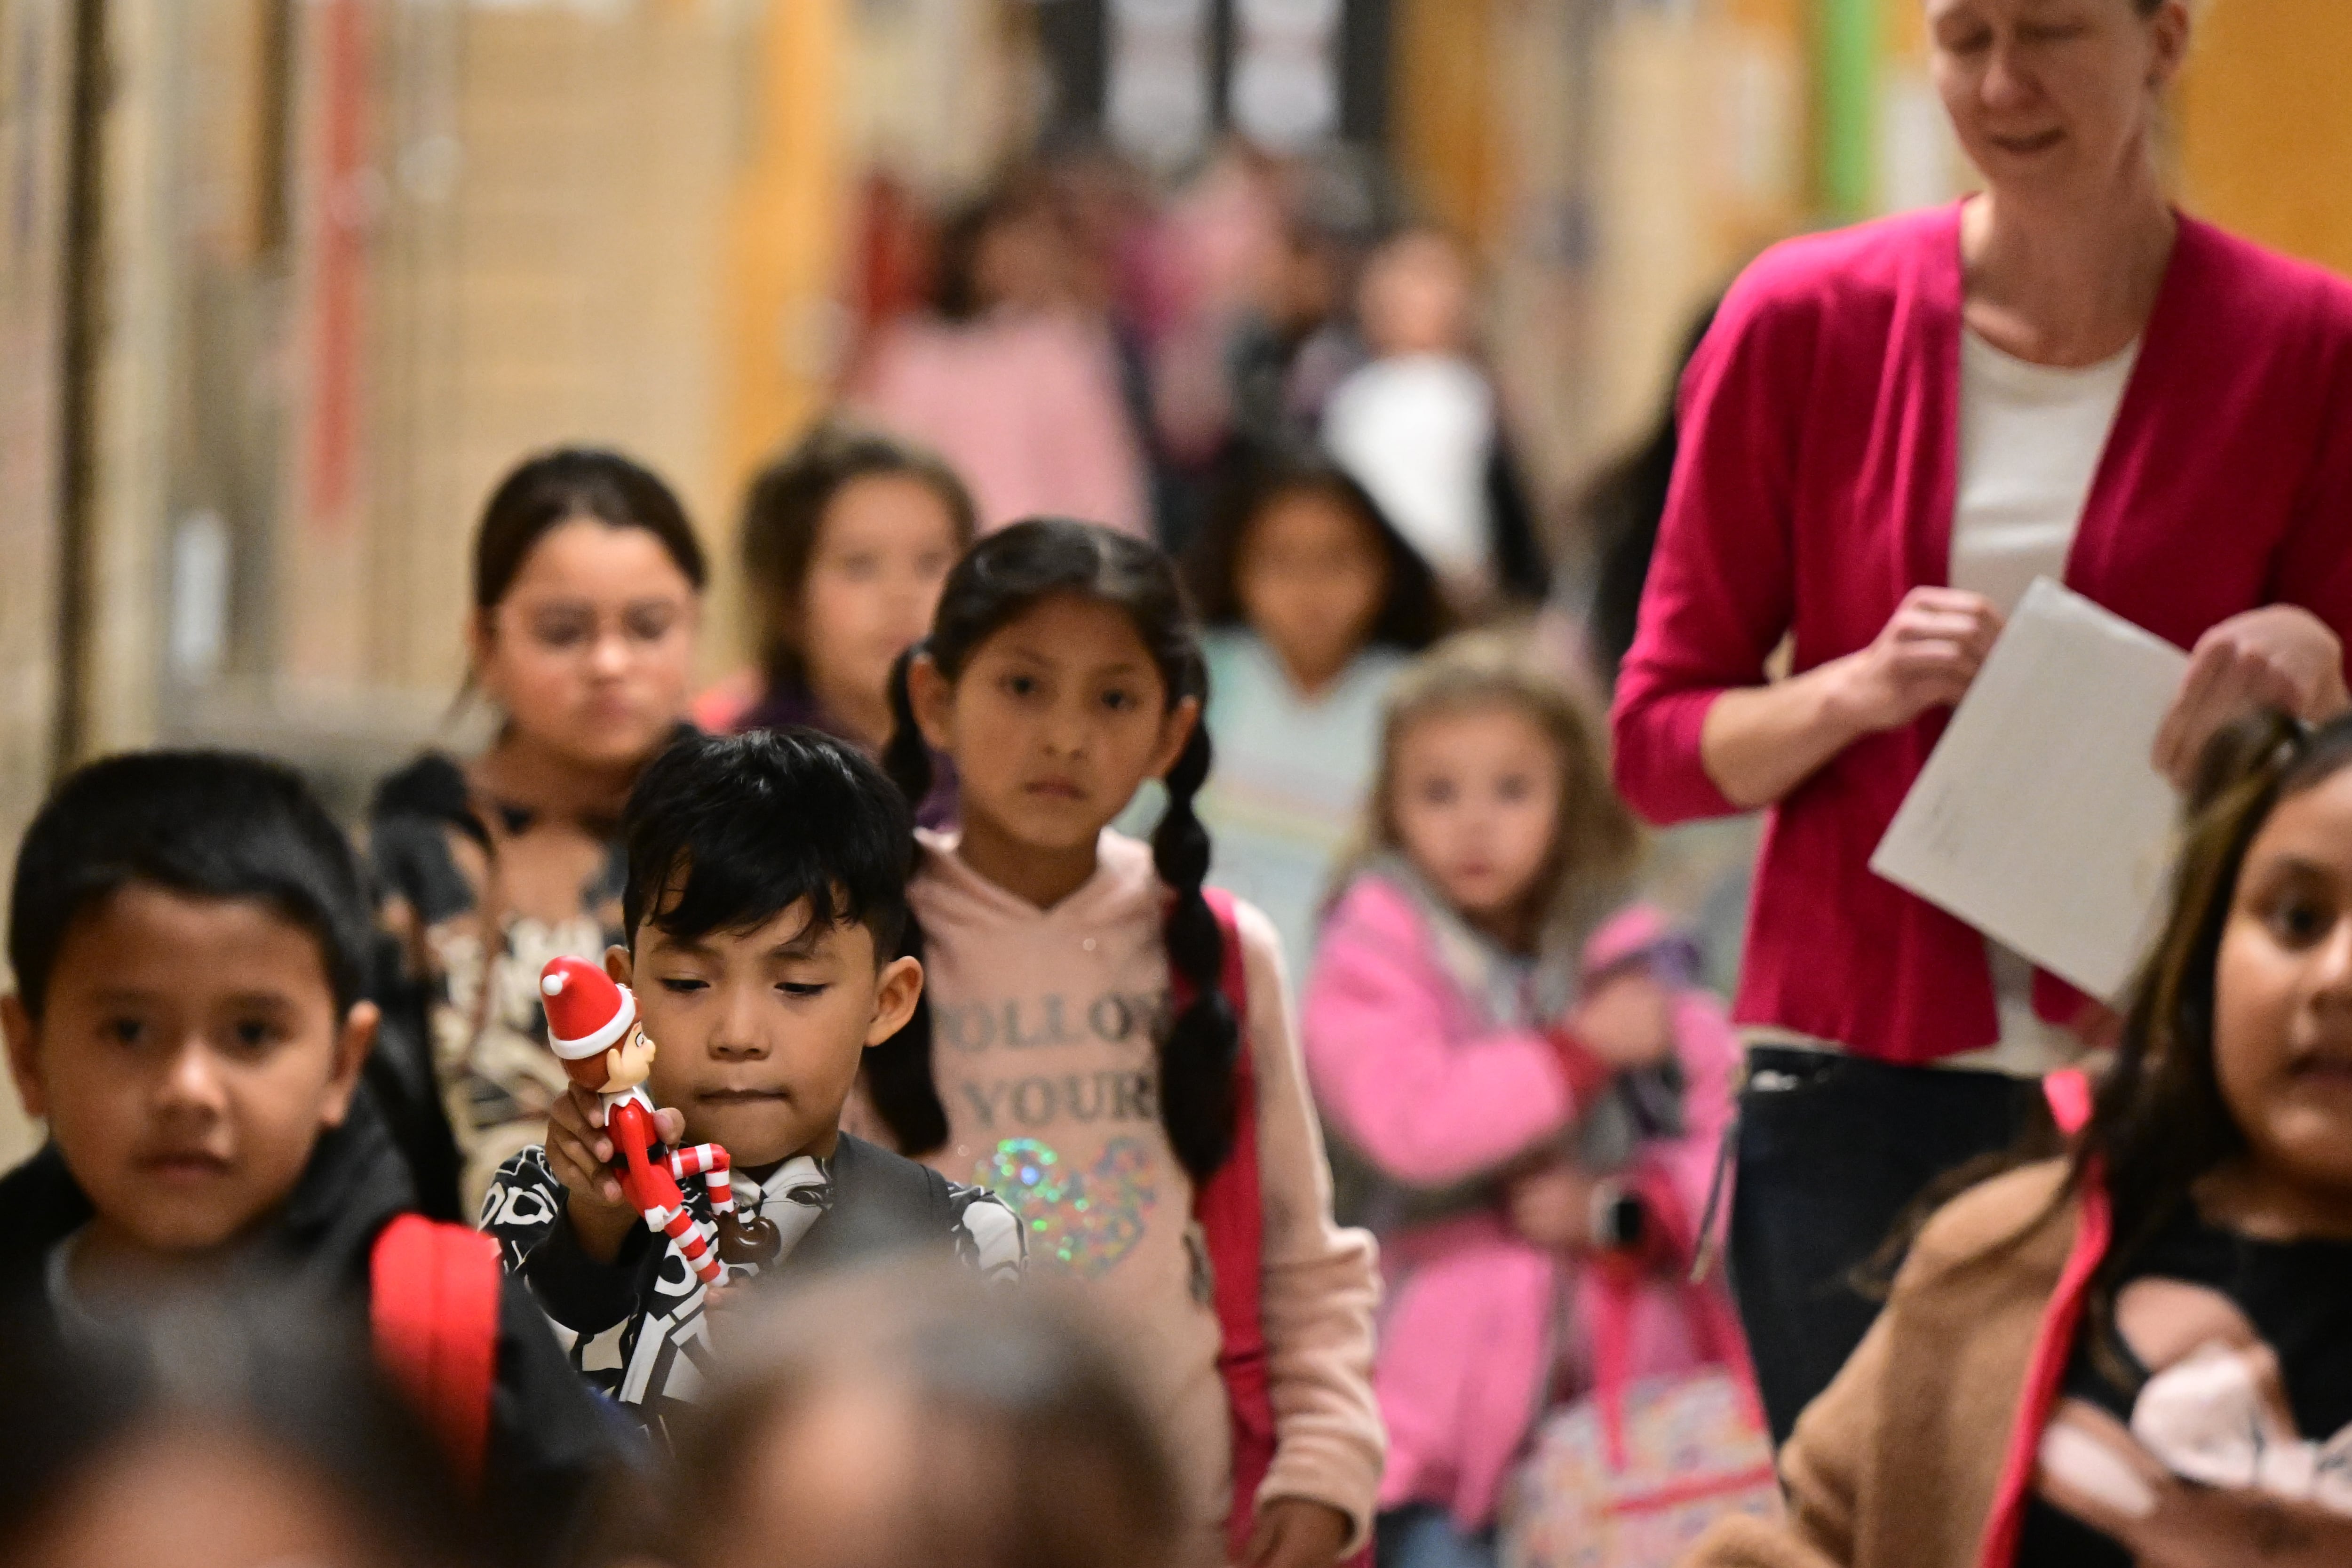 Young students move through a crowded school hallway. A girl near the center of the frame looks at the camera. She has large dark eyes and long dark braids.